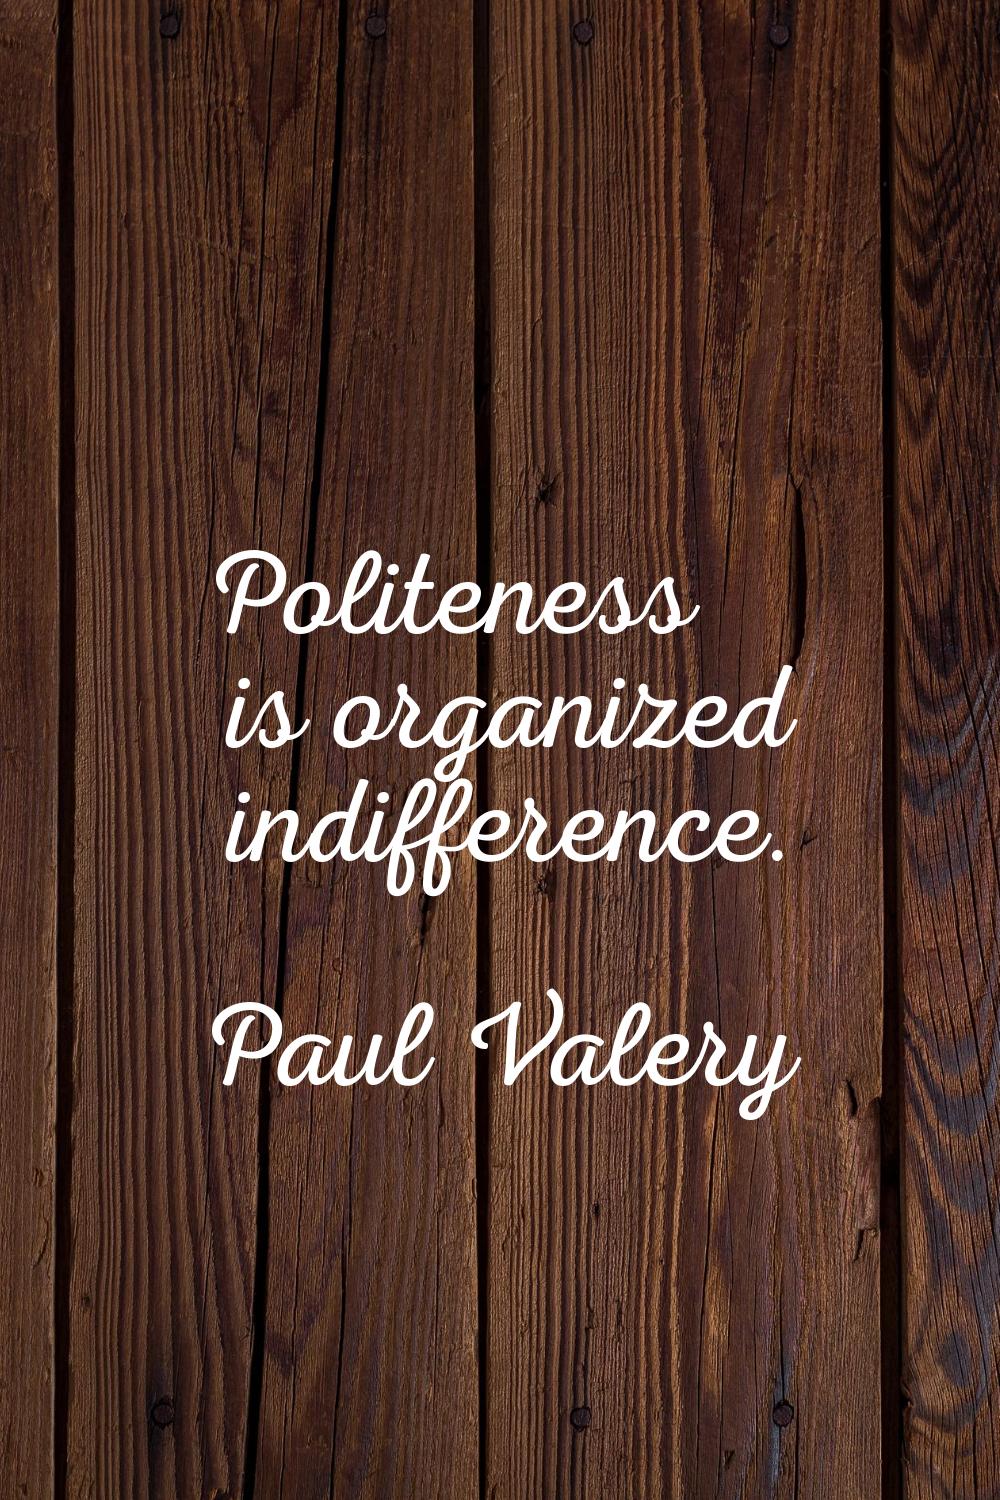 Politeness is organized indifference.